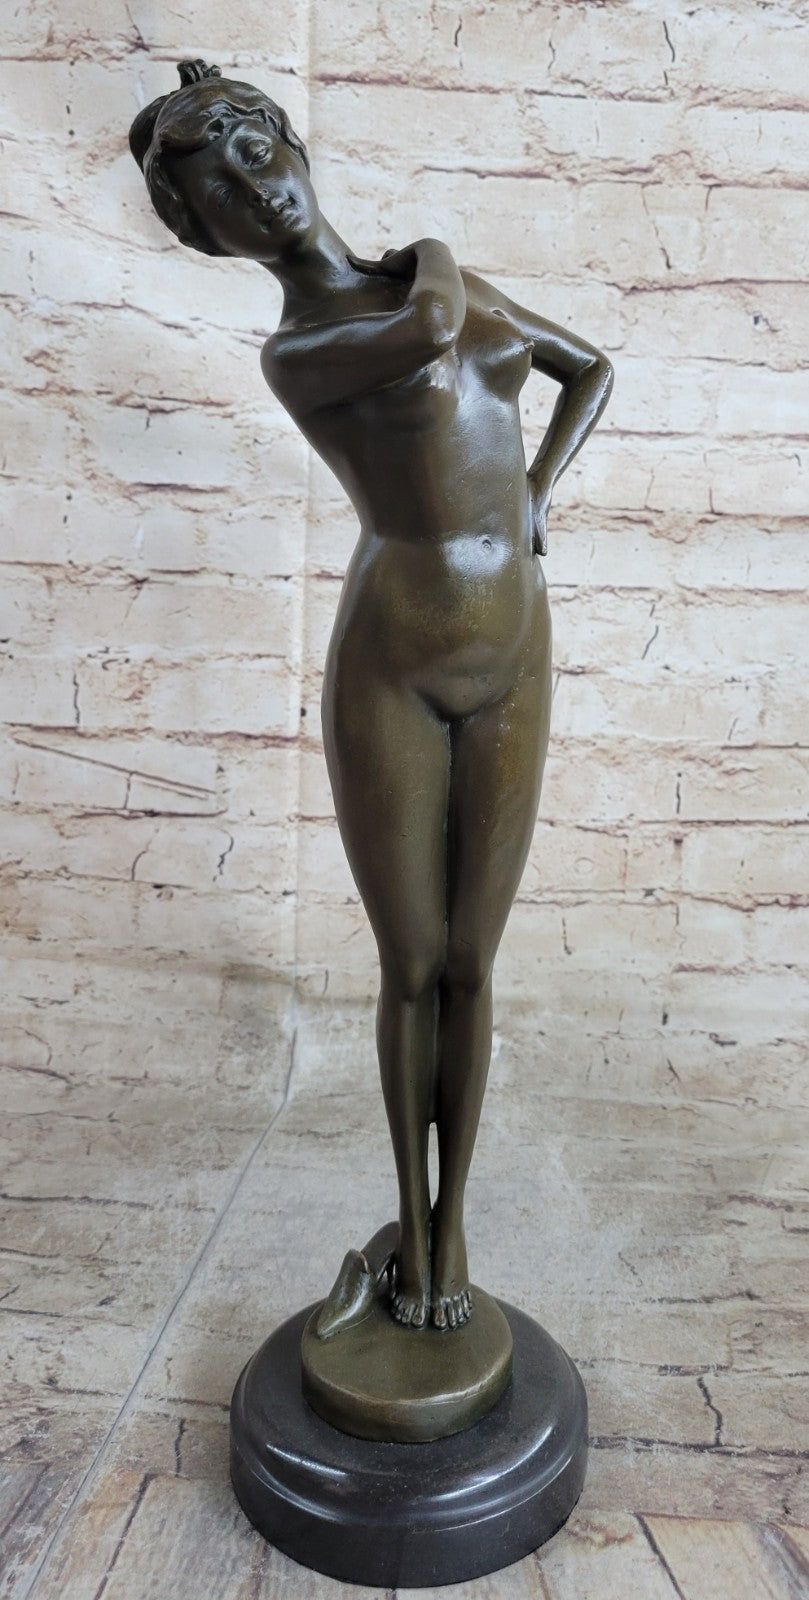 Handcrafted bronze sculpture SALE Art Patoue Jean Artist French By Woman Nude